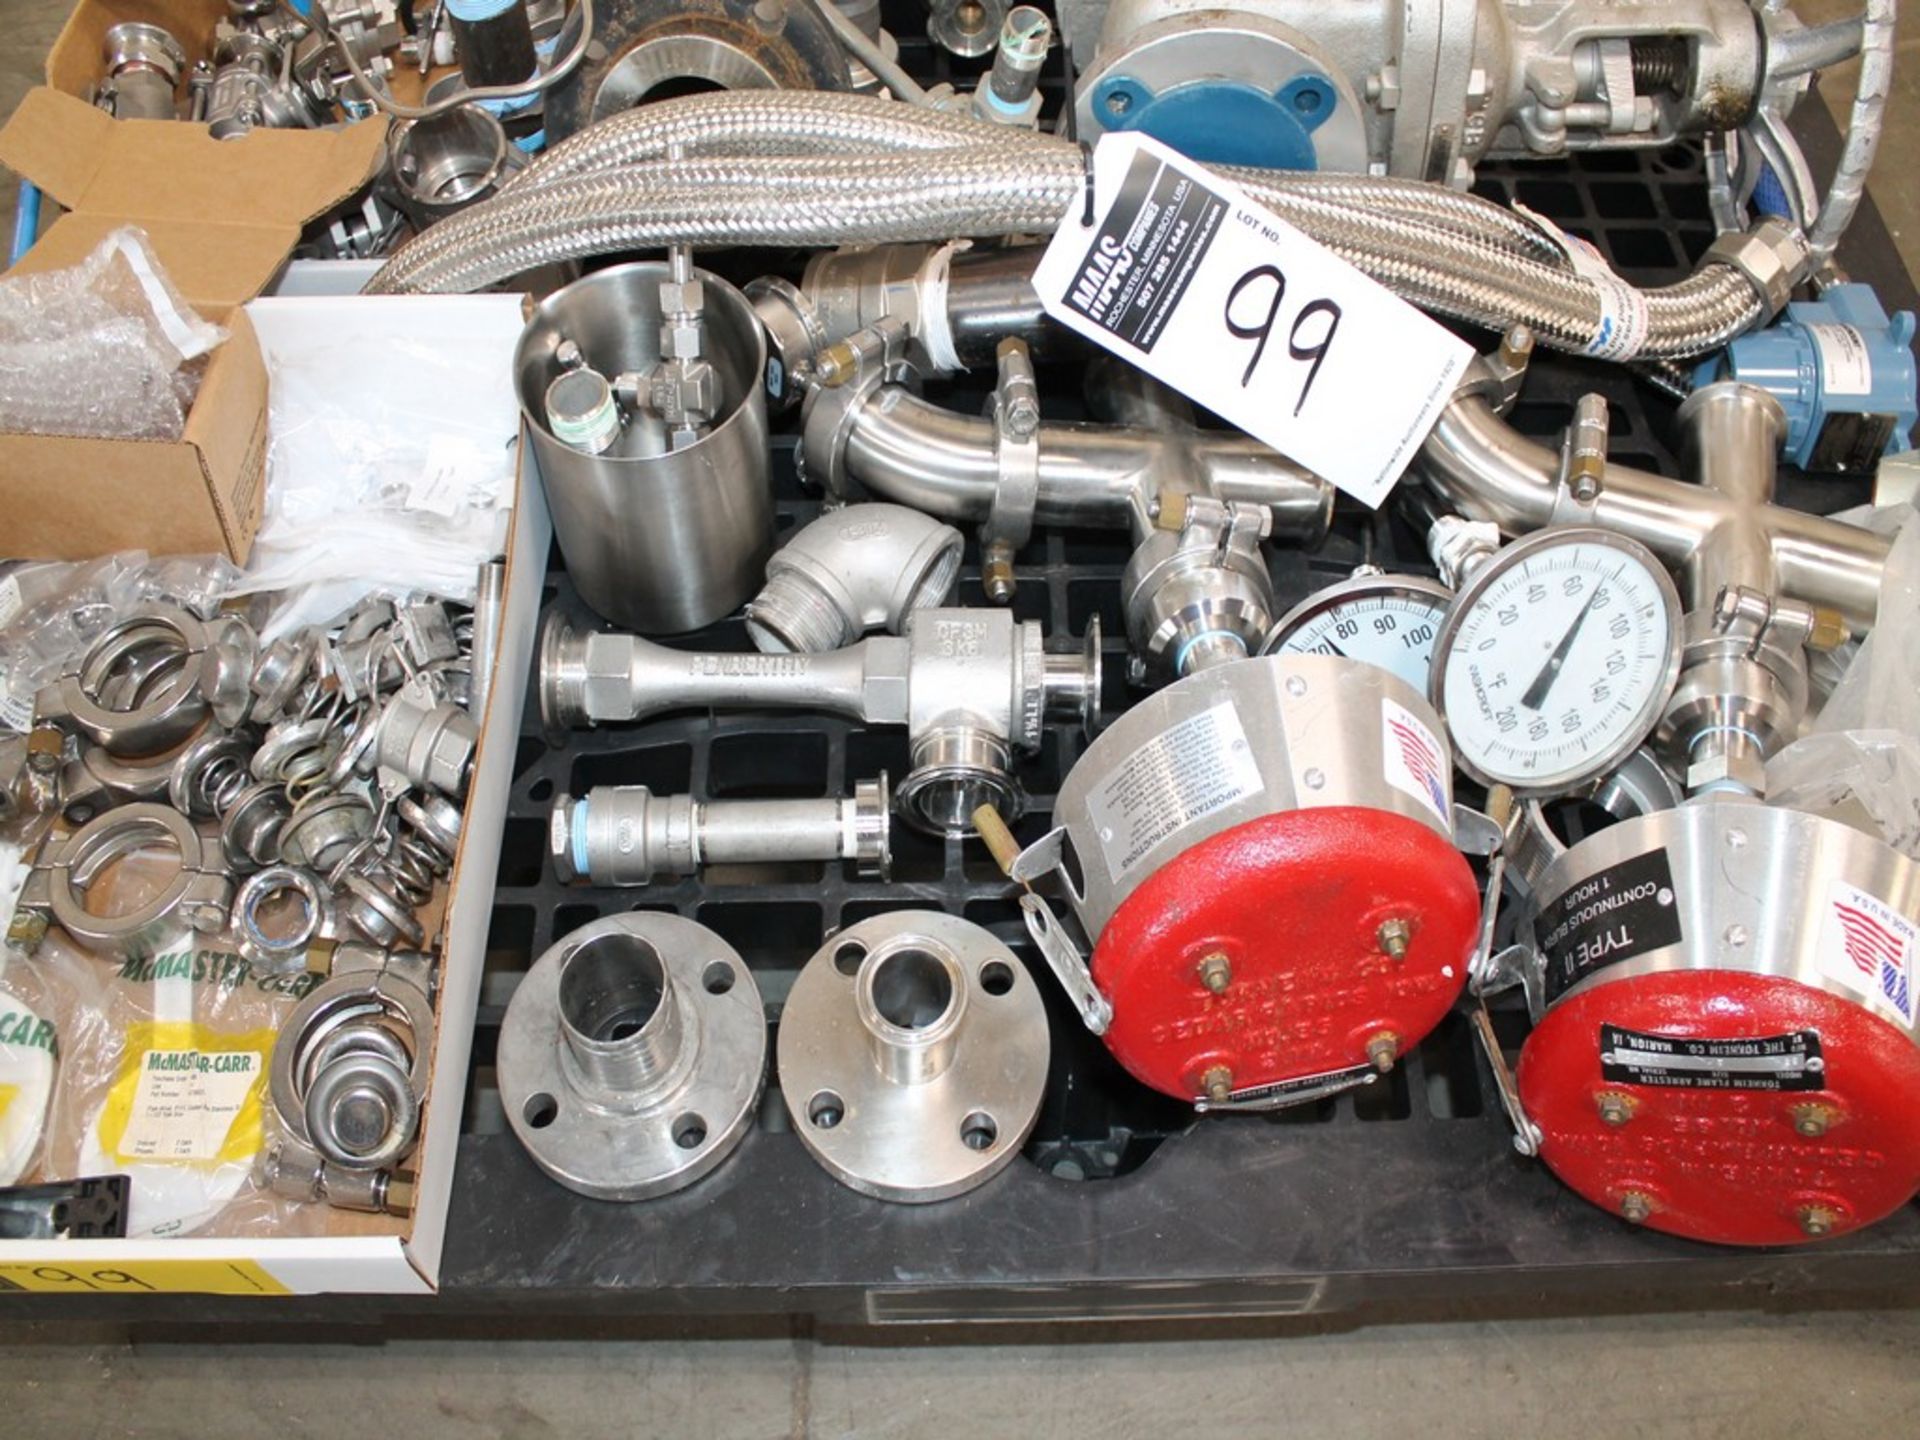 LOT CONTENTS OF PALLET WITH MISCELLANEOUS FLAME ARRESTORS, HOSES, VALVES, TRANSMITTERS, PIPE - Image 13 of 18